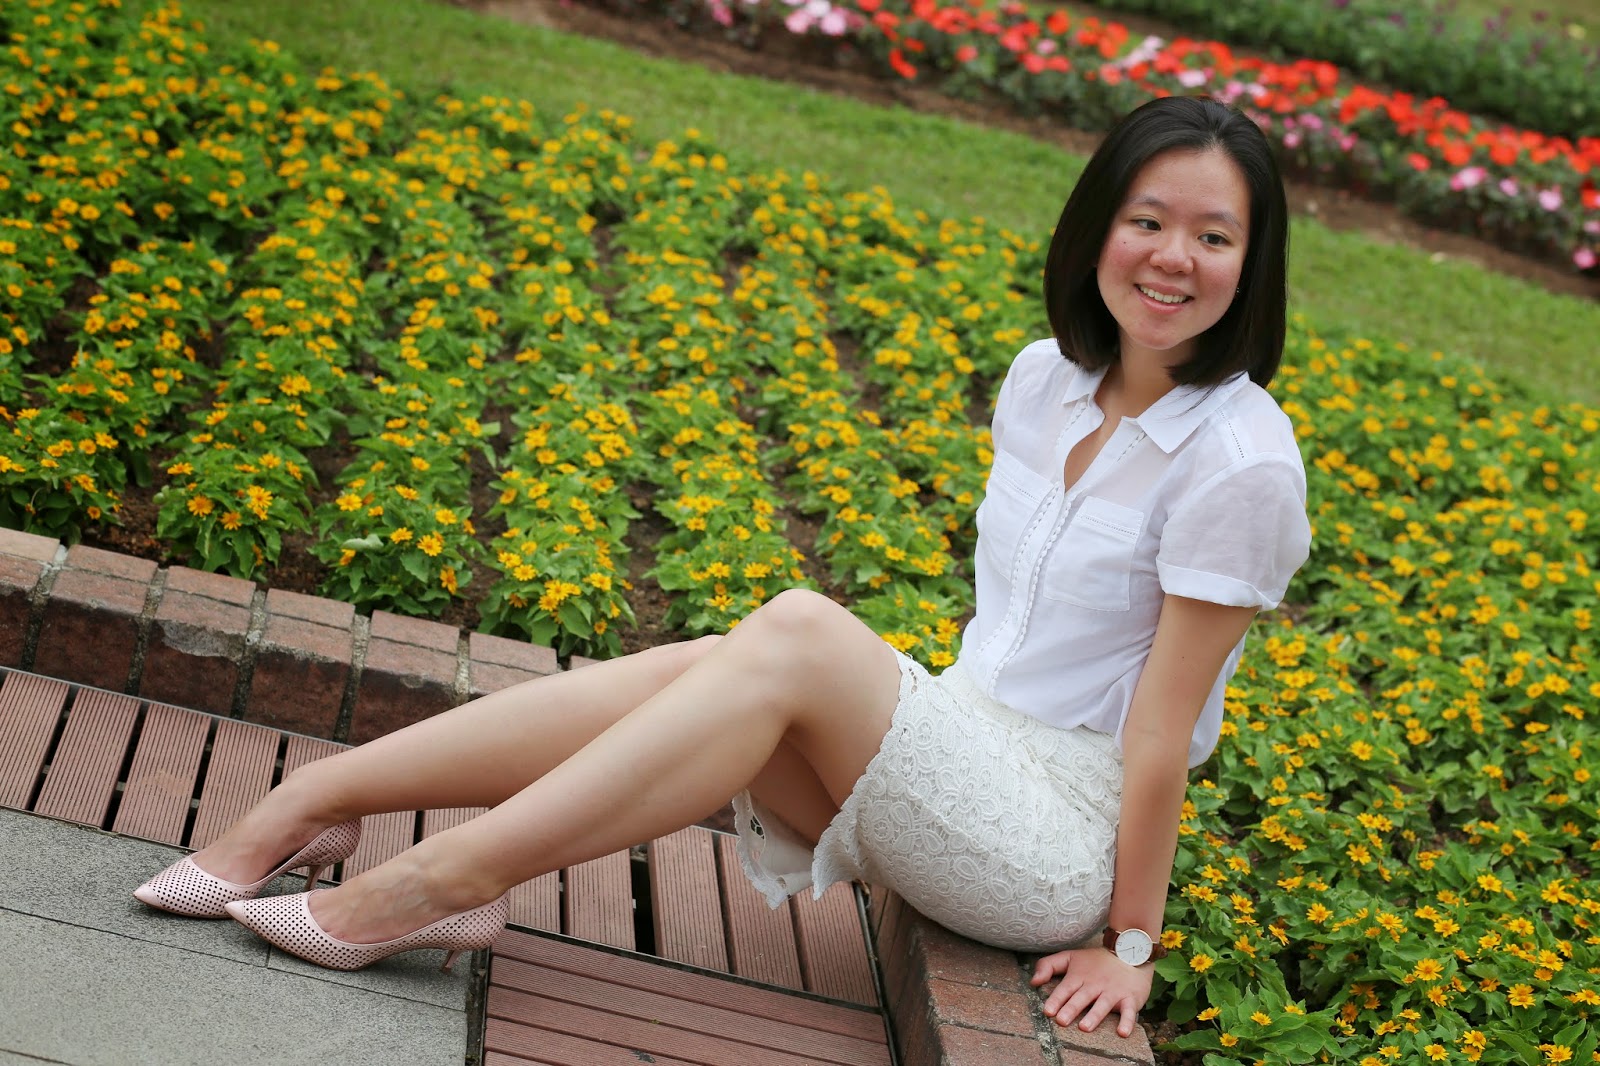 hk fashion blog, corporate fashion blog, what to wear to work, business casual, finance fashion blog, that working life, white lace pencil skirt, white eyelet top, hong kong fashion blogger, corporate style, corporate chic, ann taylor white button up, intermix pencil skirt